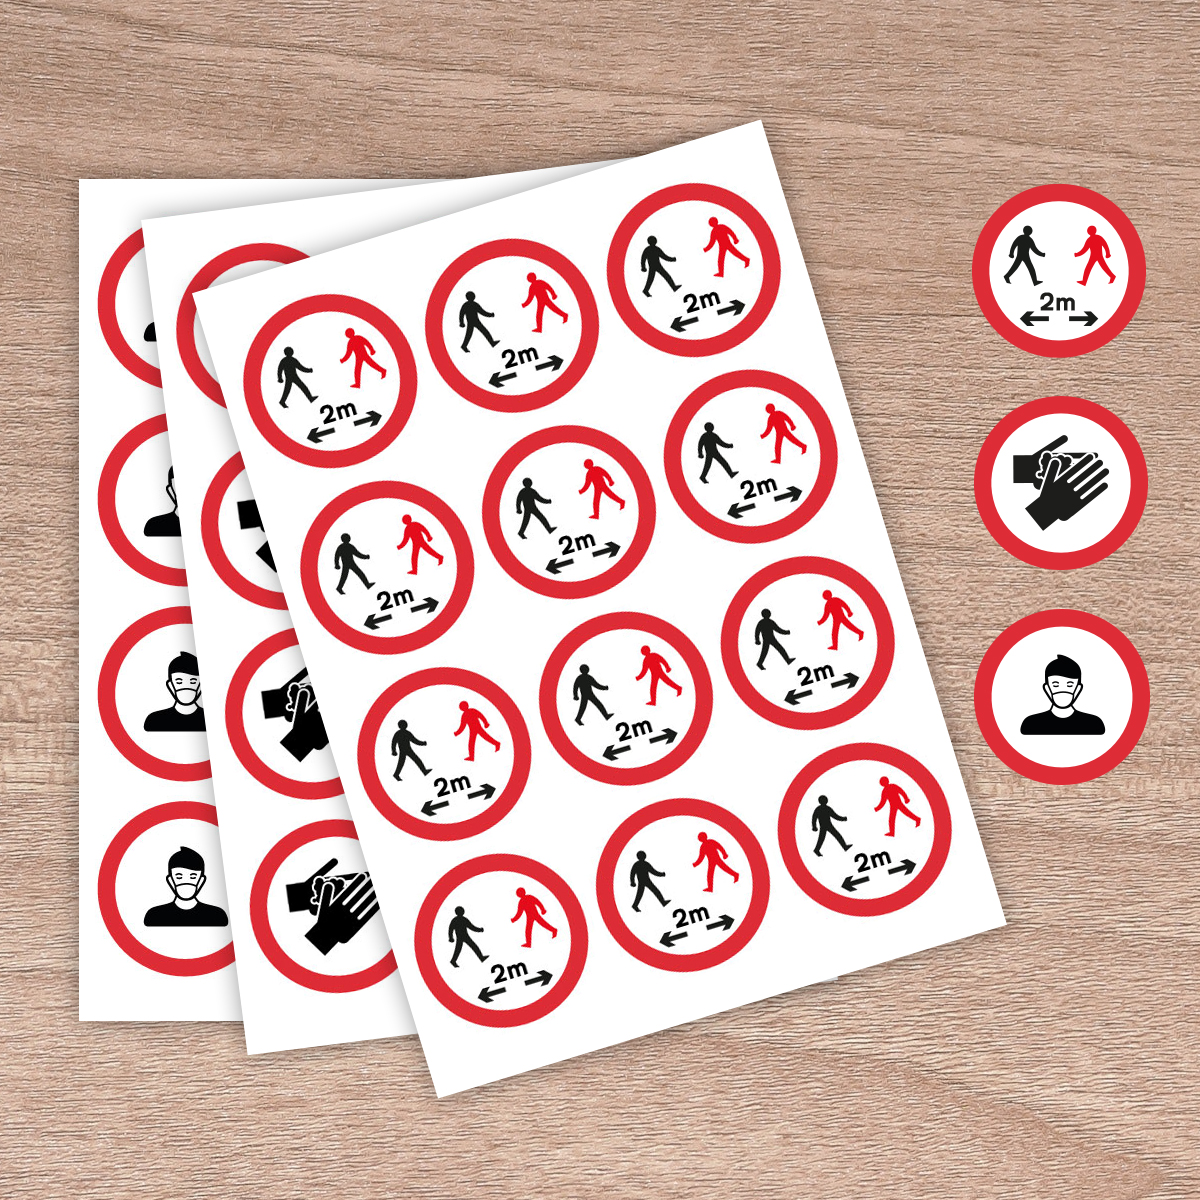 Social Distancing Remain 2 metres from others - 64mm Round Stickers